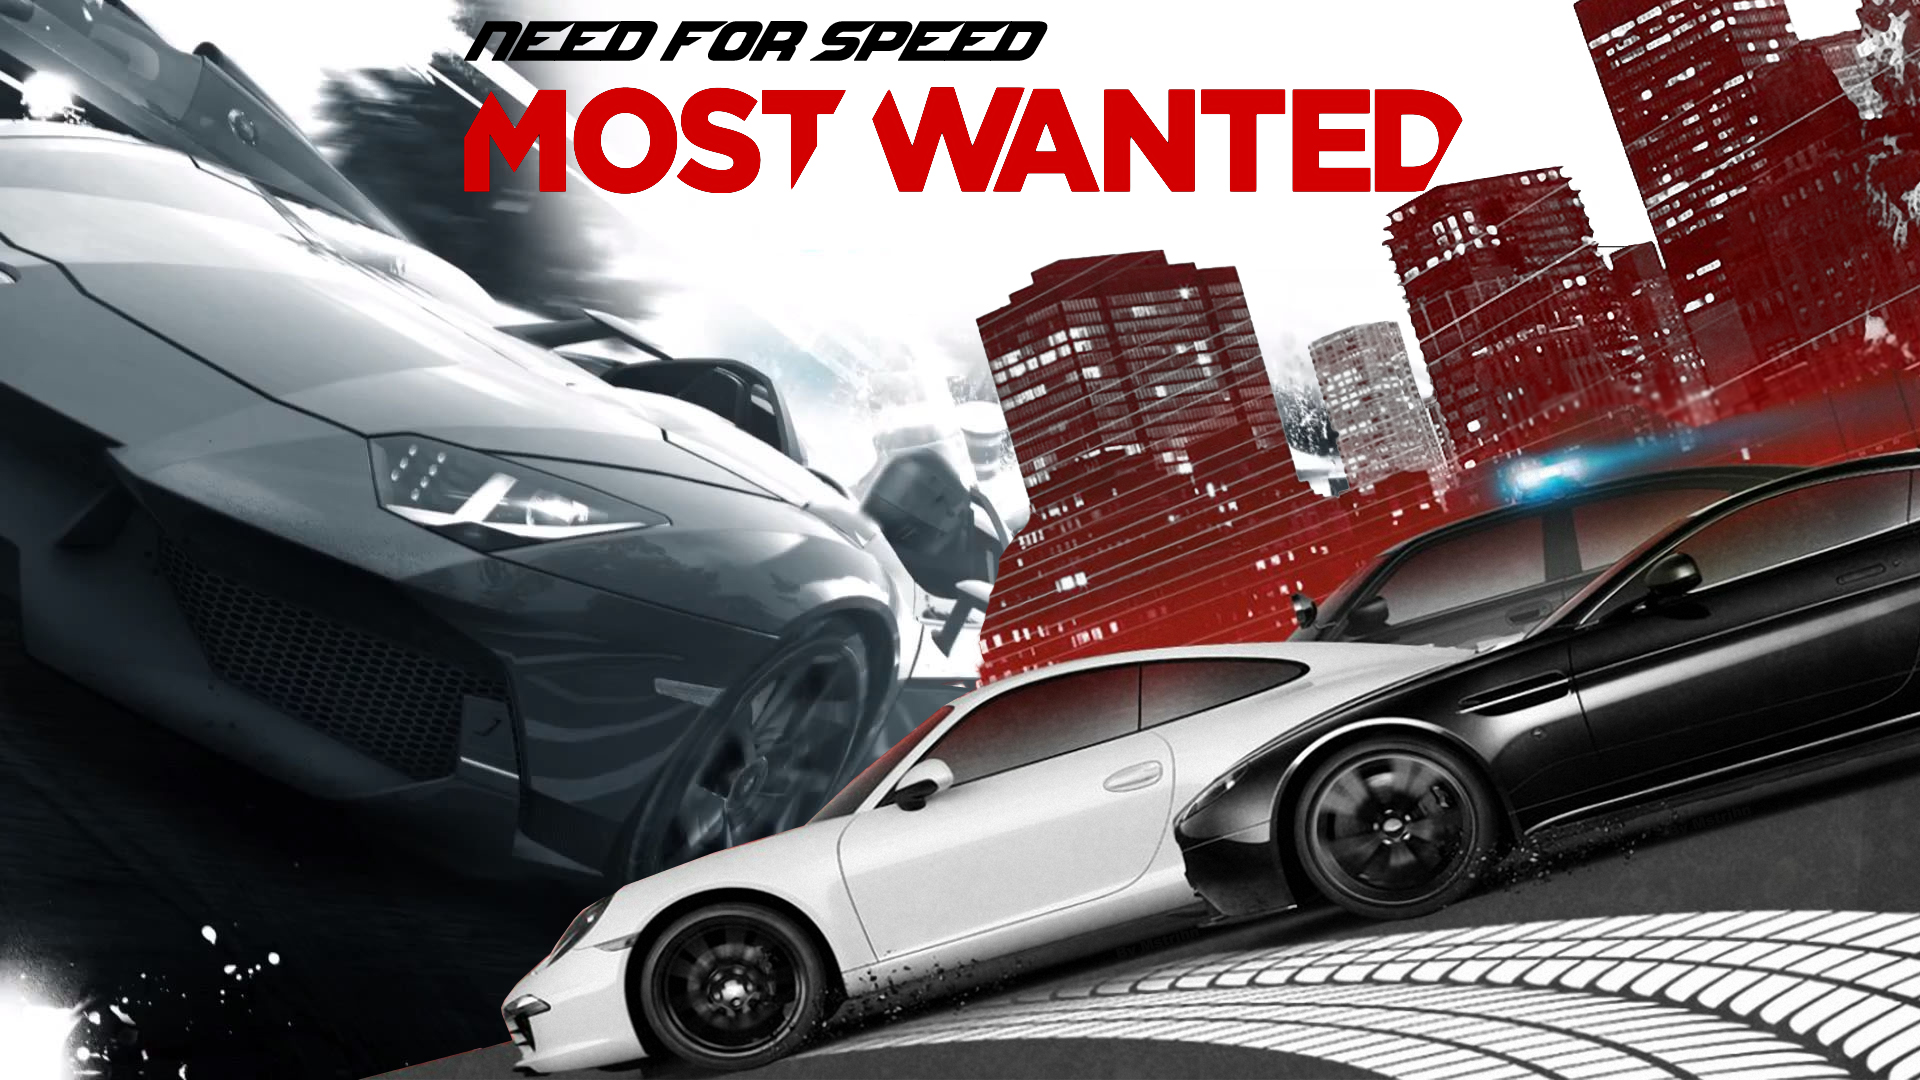 need for speed most wanted 2 download free